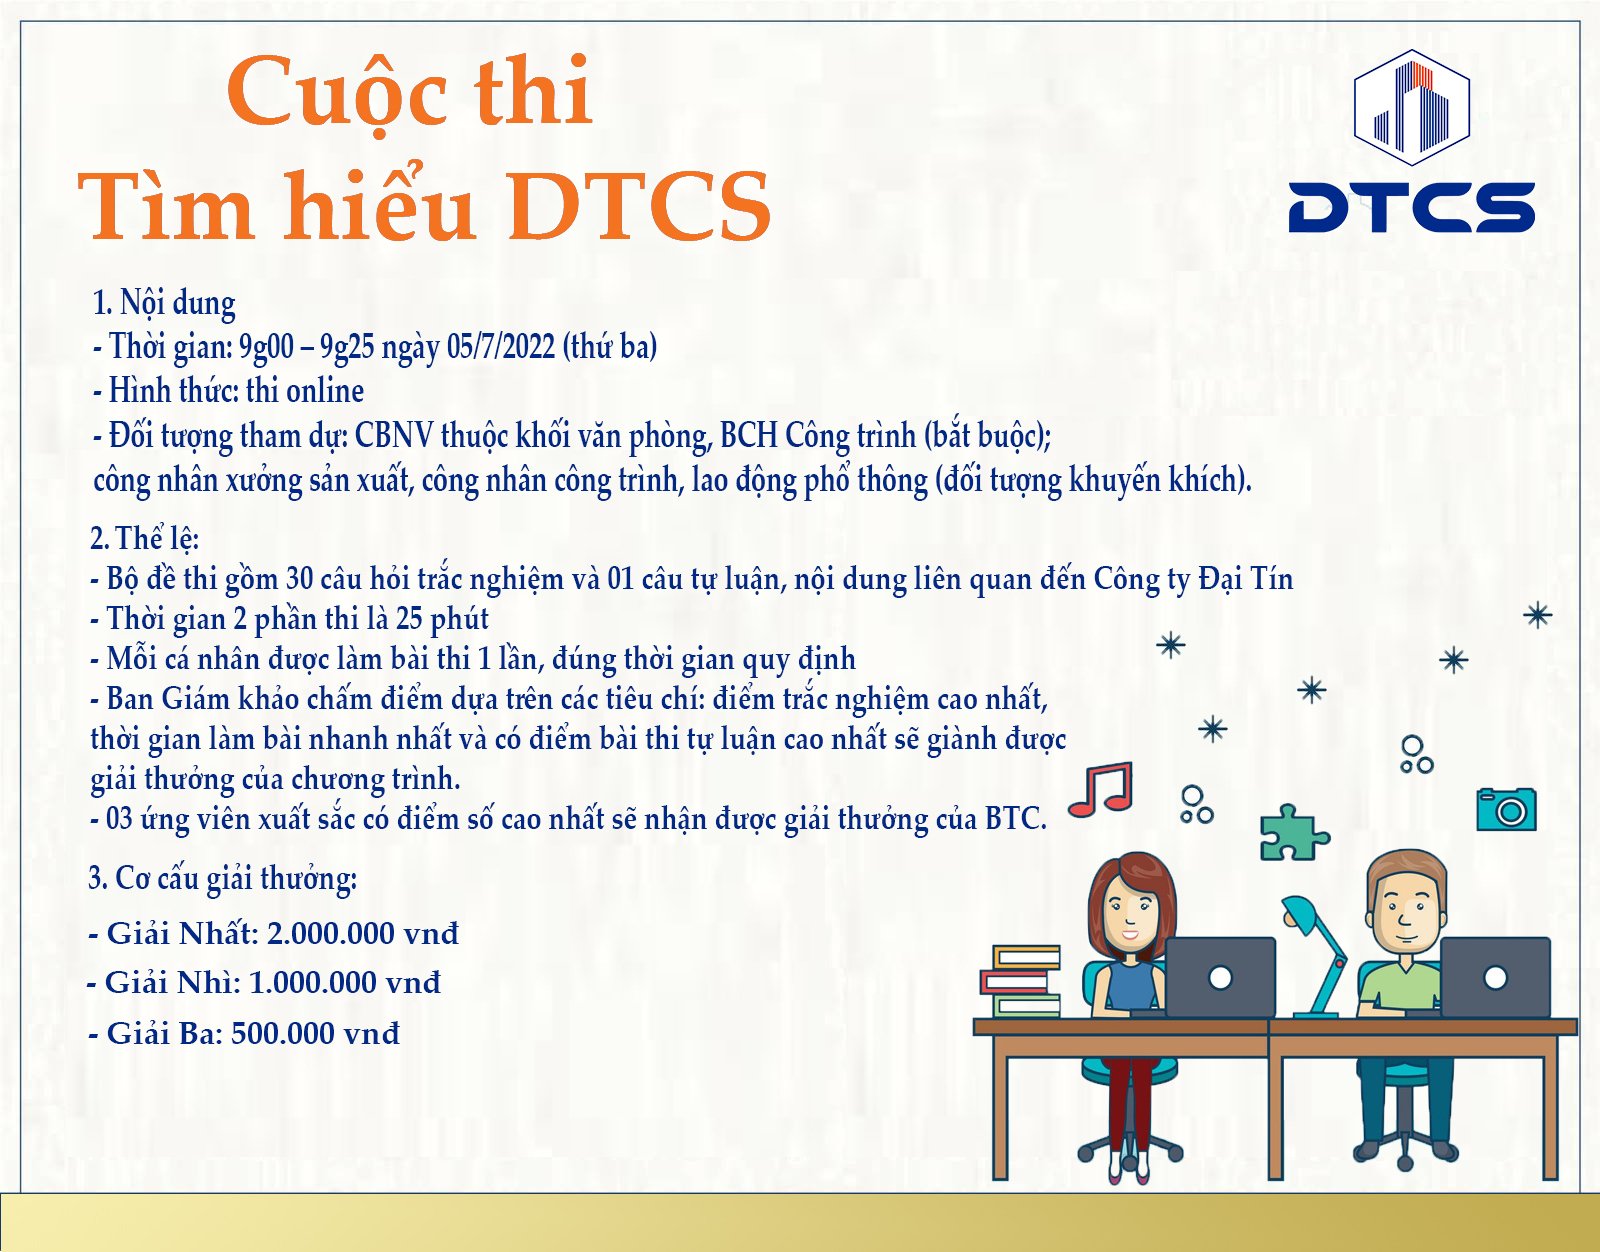 NOTICE OF ORGANIZATION OF THE PROGRAM "FIND OUT DTCS